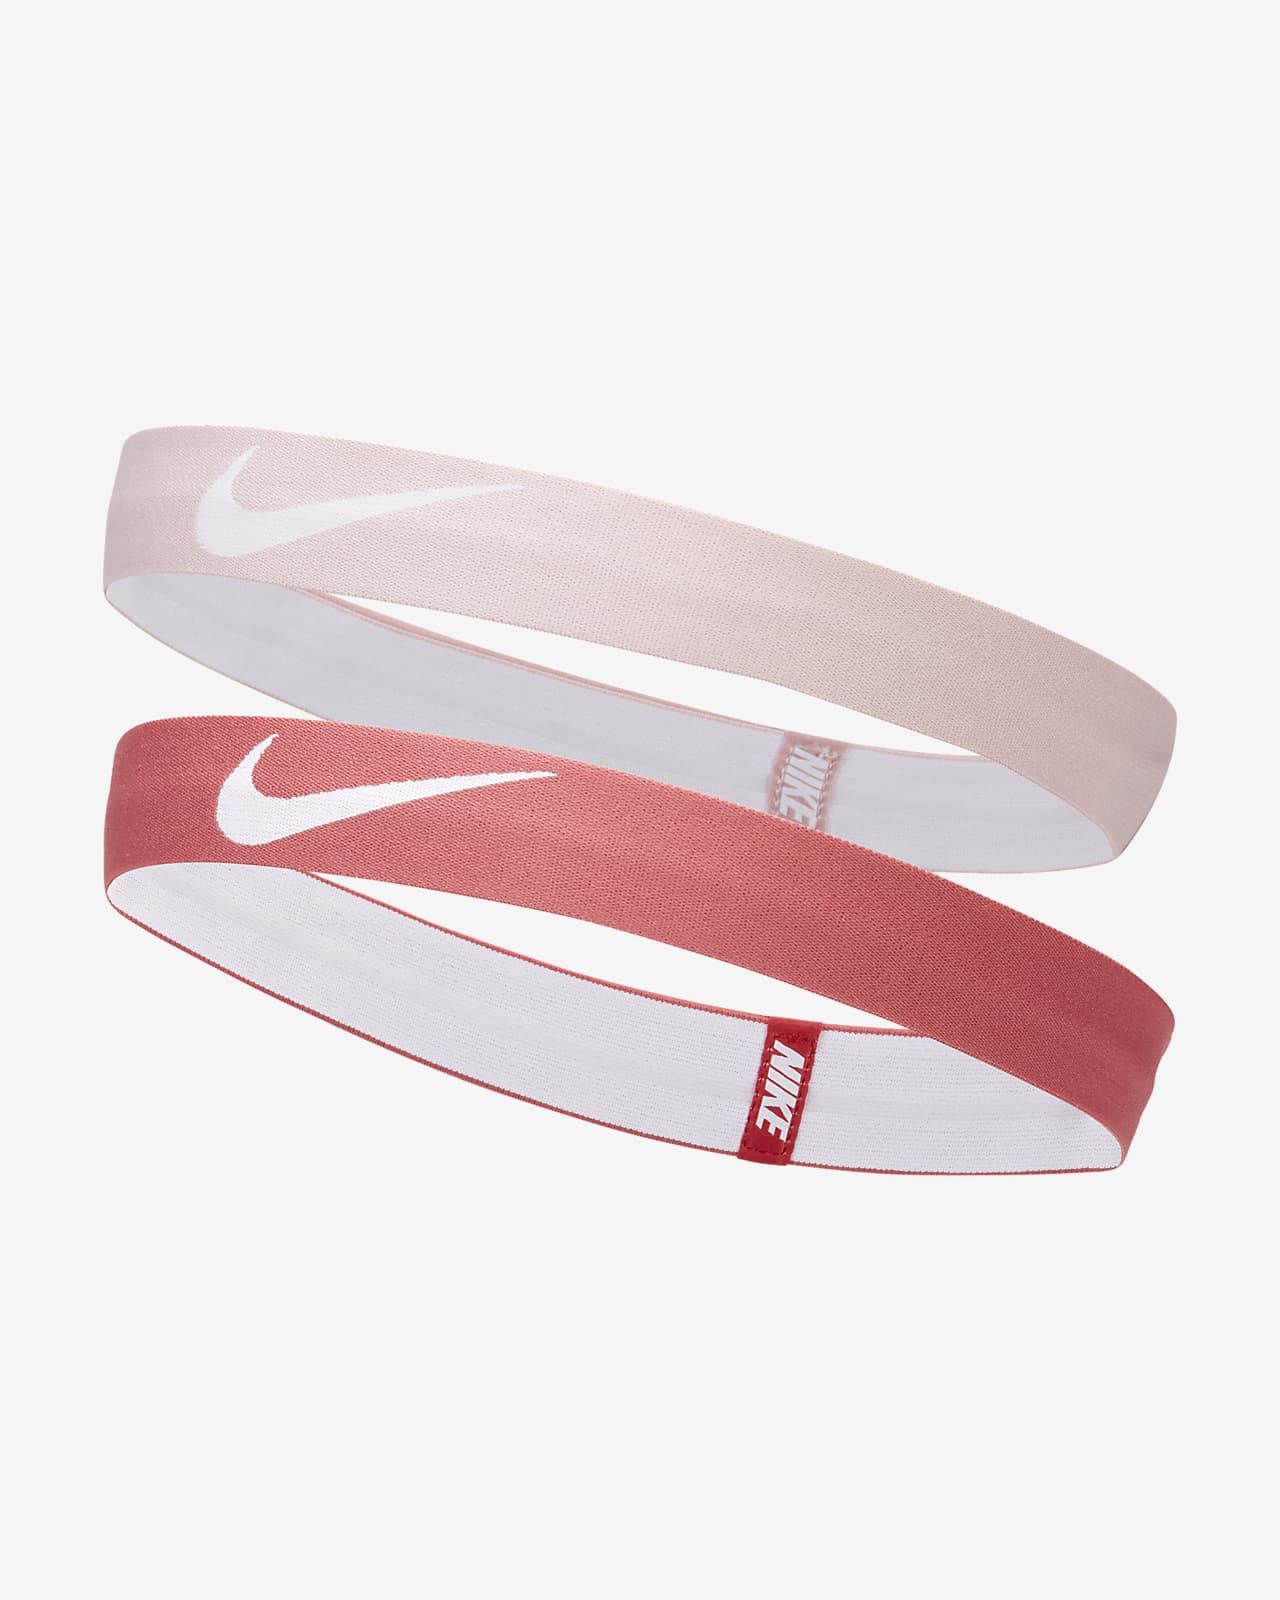 Nike Headbands (2-Pack with Pouch)